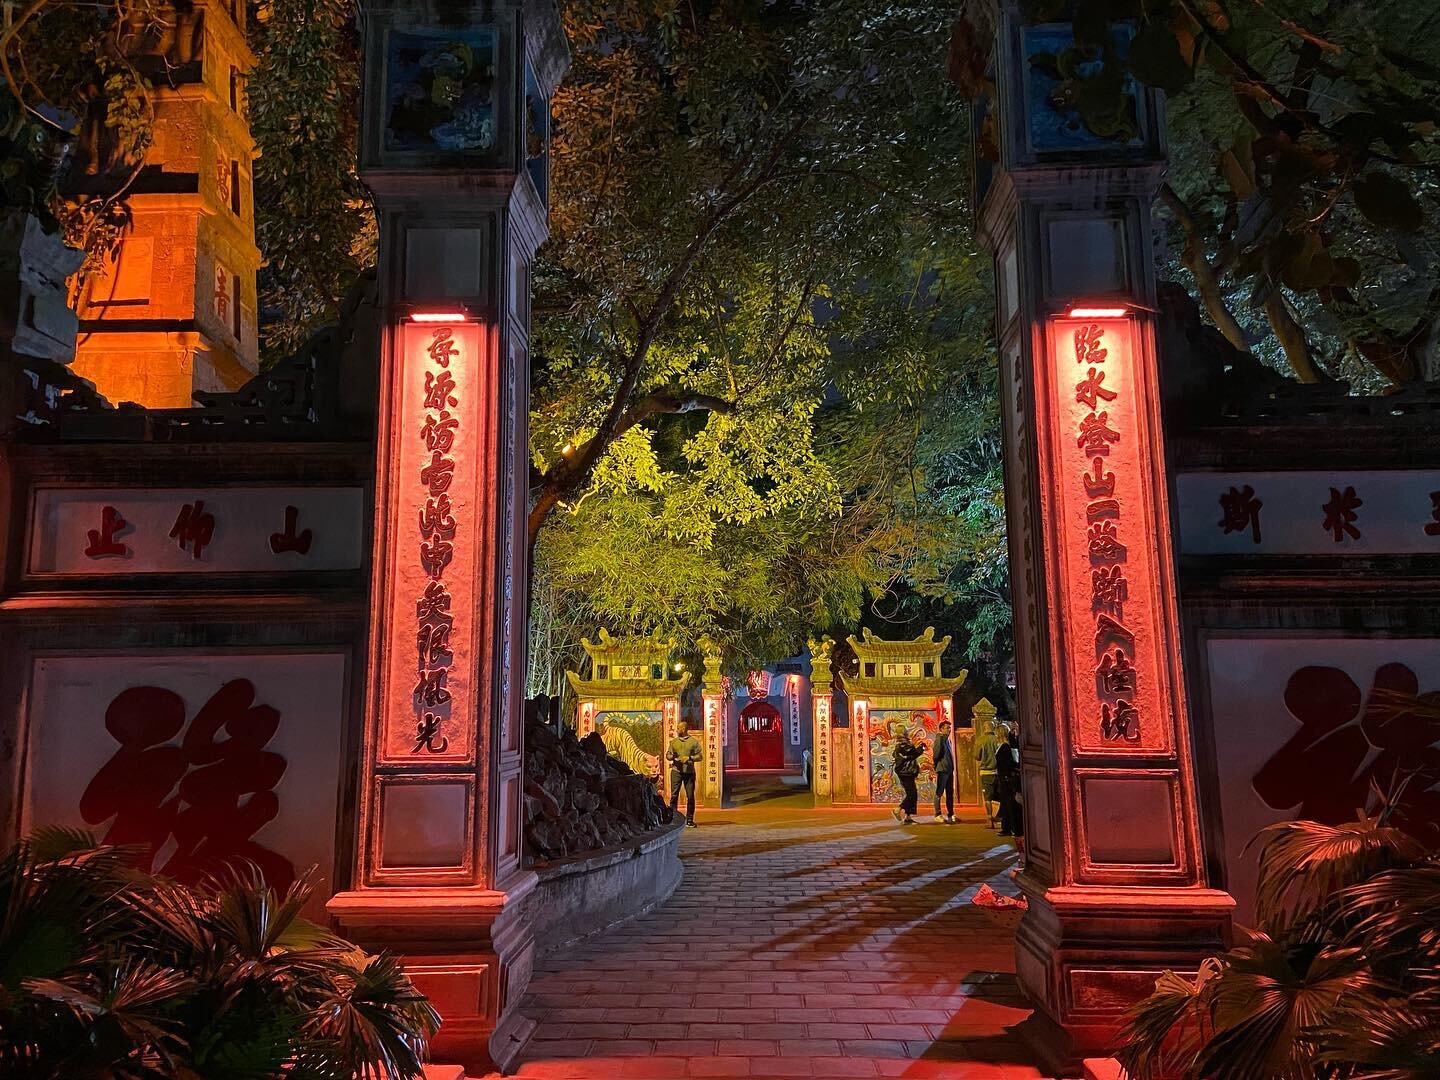 The three layered gates and bridge to the island of the Ngoi Sun Temple, the spiritual heartbeat of Hanoi. Regardless of how many times you&rsquo;ve been to Hanoi, it&rsquo;s an intriguing architectural marvel featuring Taoist and Buddhist influences